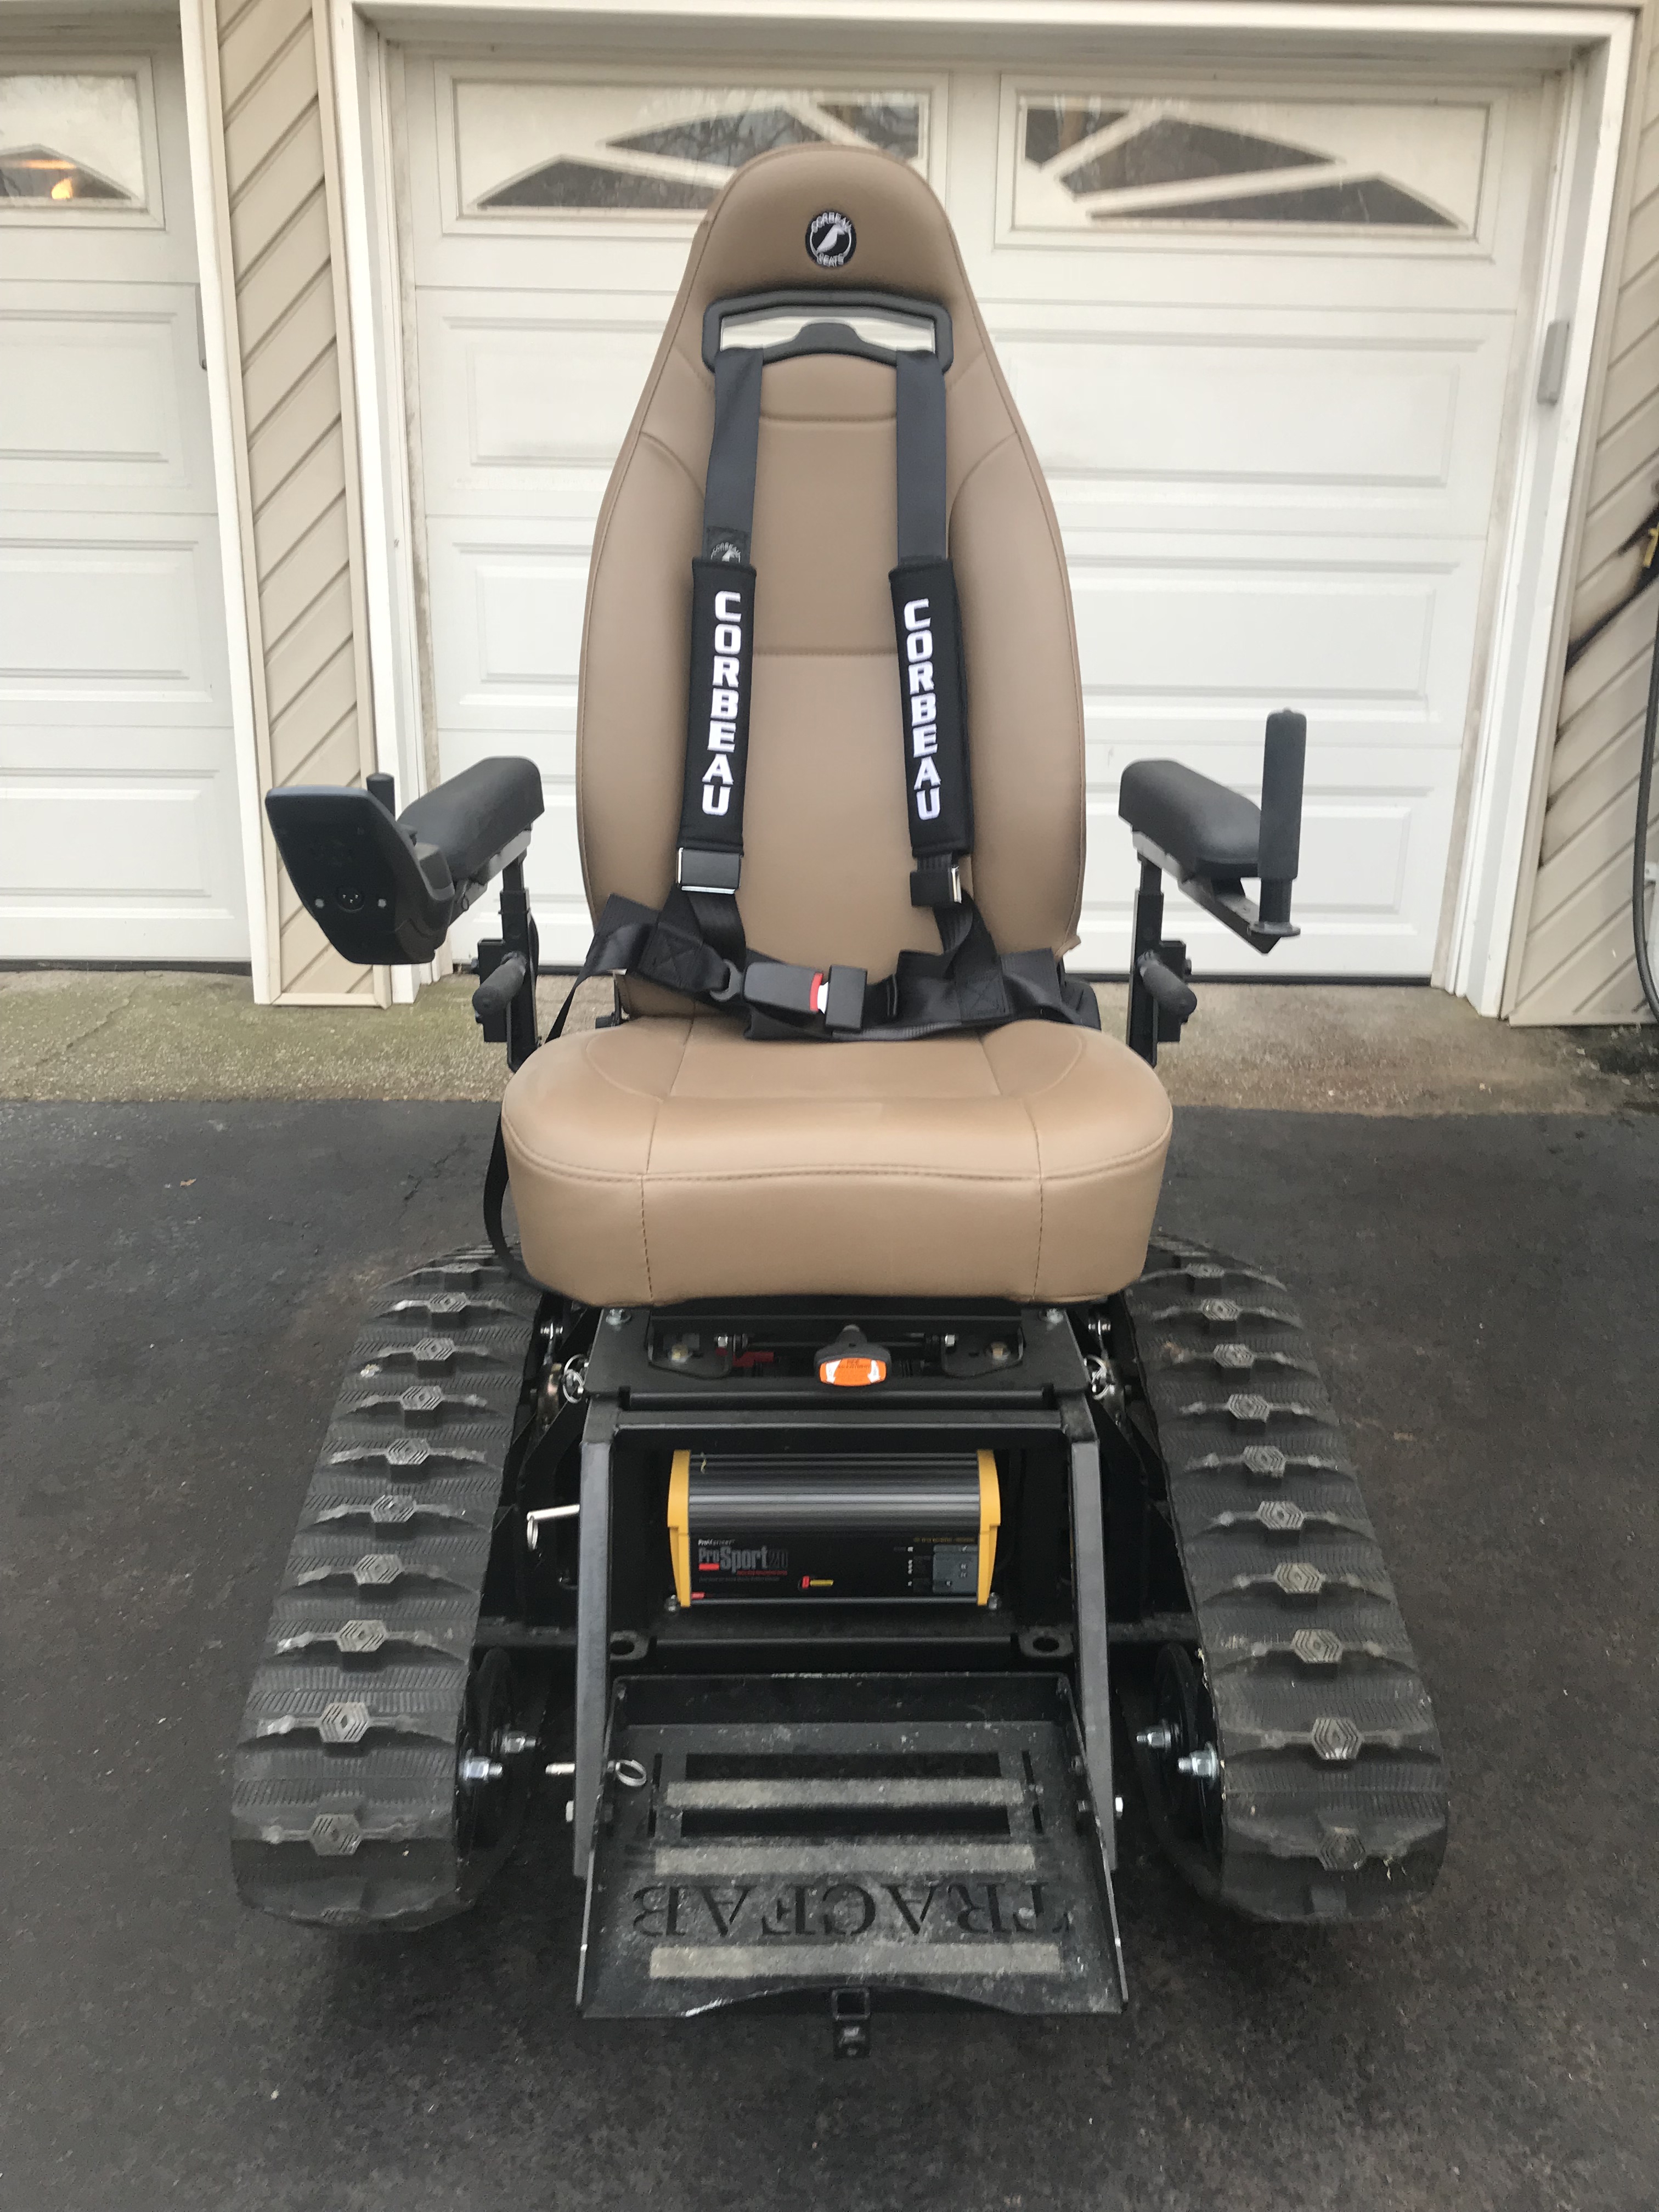 Details About Tracfab All Terrain Tracked Wheelchair Trackchair Tank Chair Action Trac Fab Buy Sell Used Electric Wheelchairs Mobility Scooters More